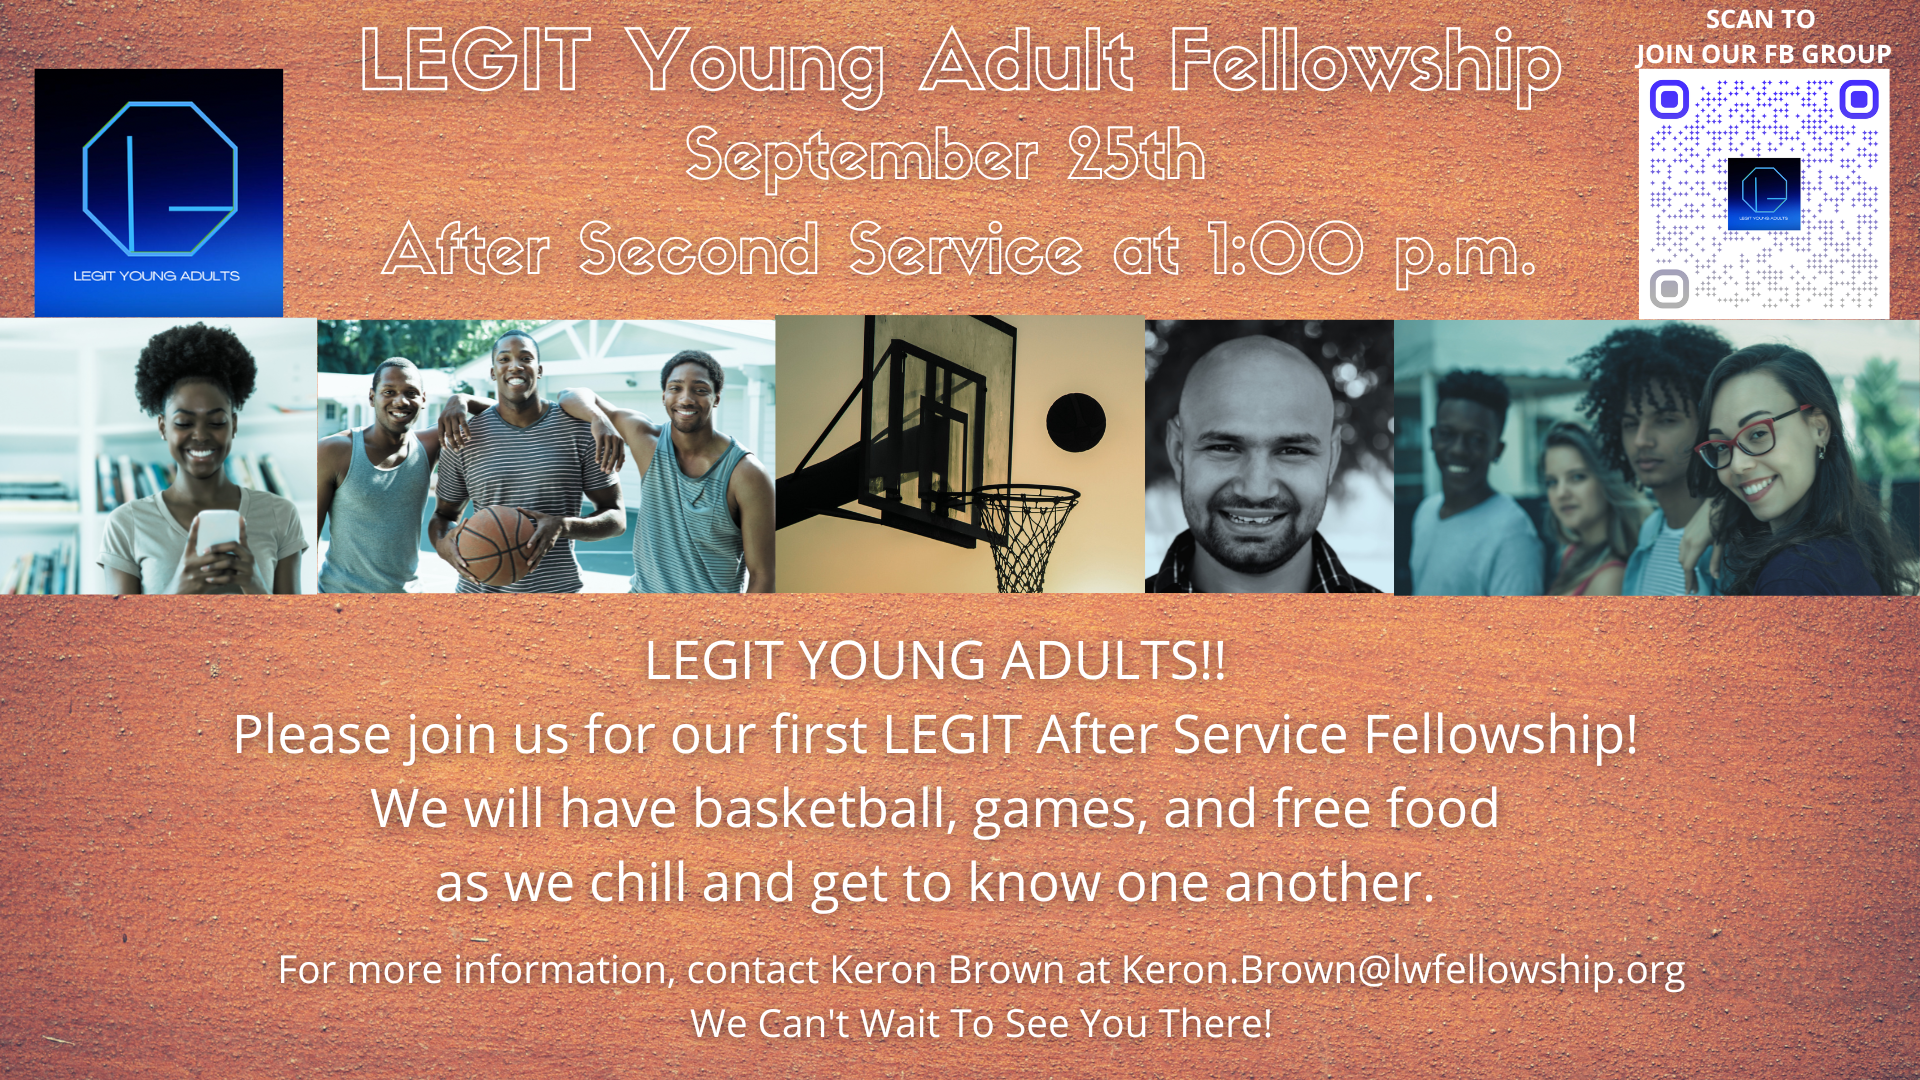 LEGIT Young Adult Fellowship – Sept. 25th 1:00 p.m. head image